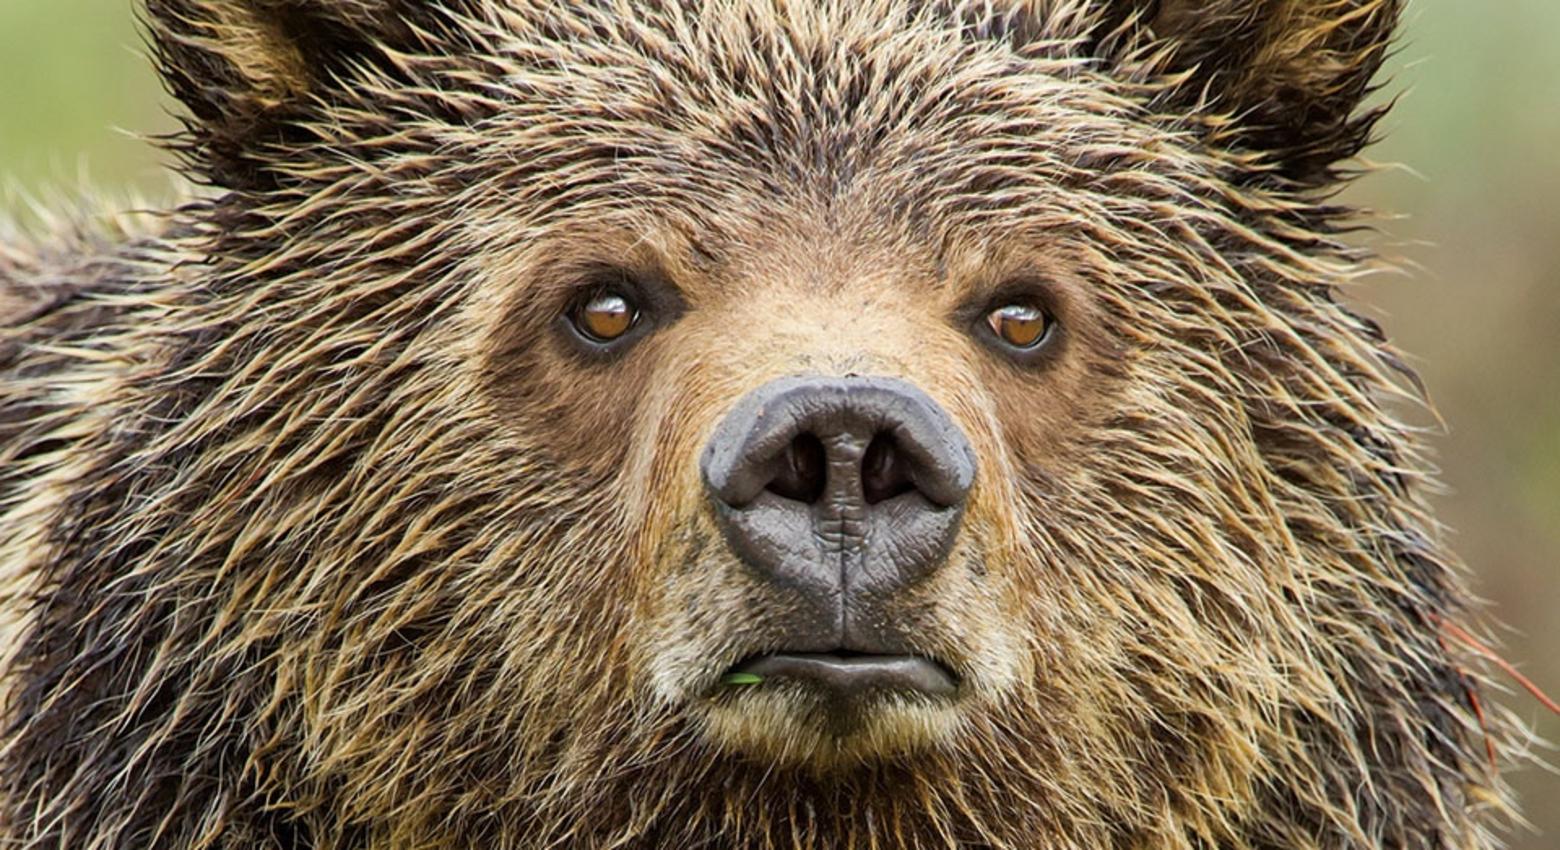 "Eyes of the Grizzly," a photo by Thomas D. Mangelsen (mangelsen.com)